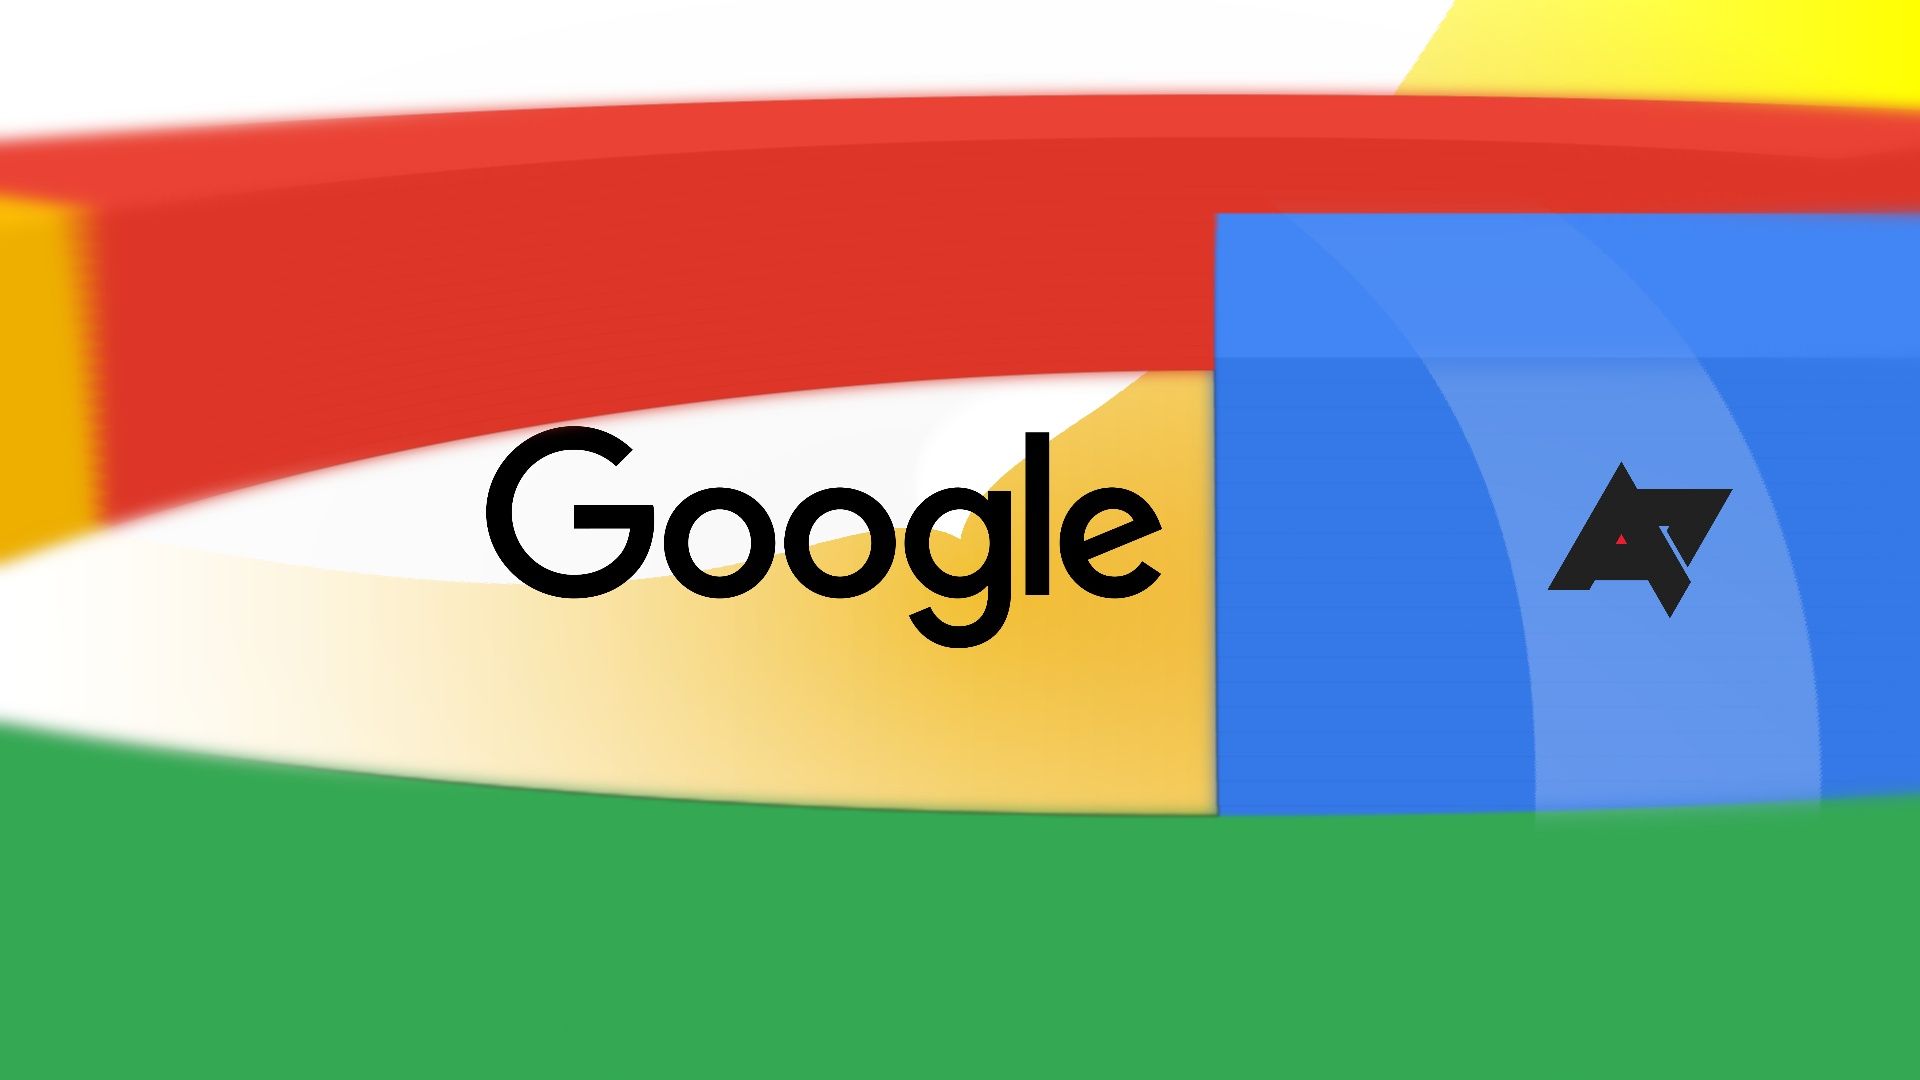 The word 'Google' against a background of the Google colors